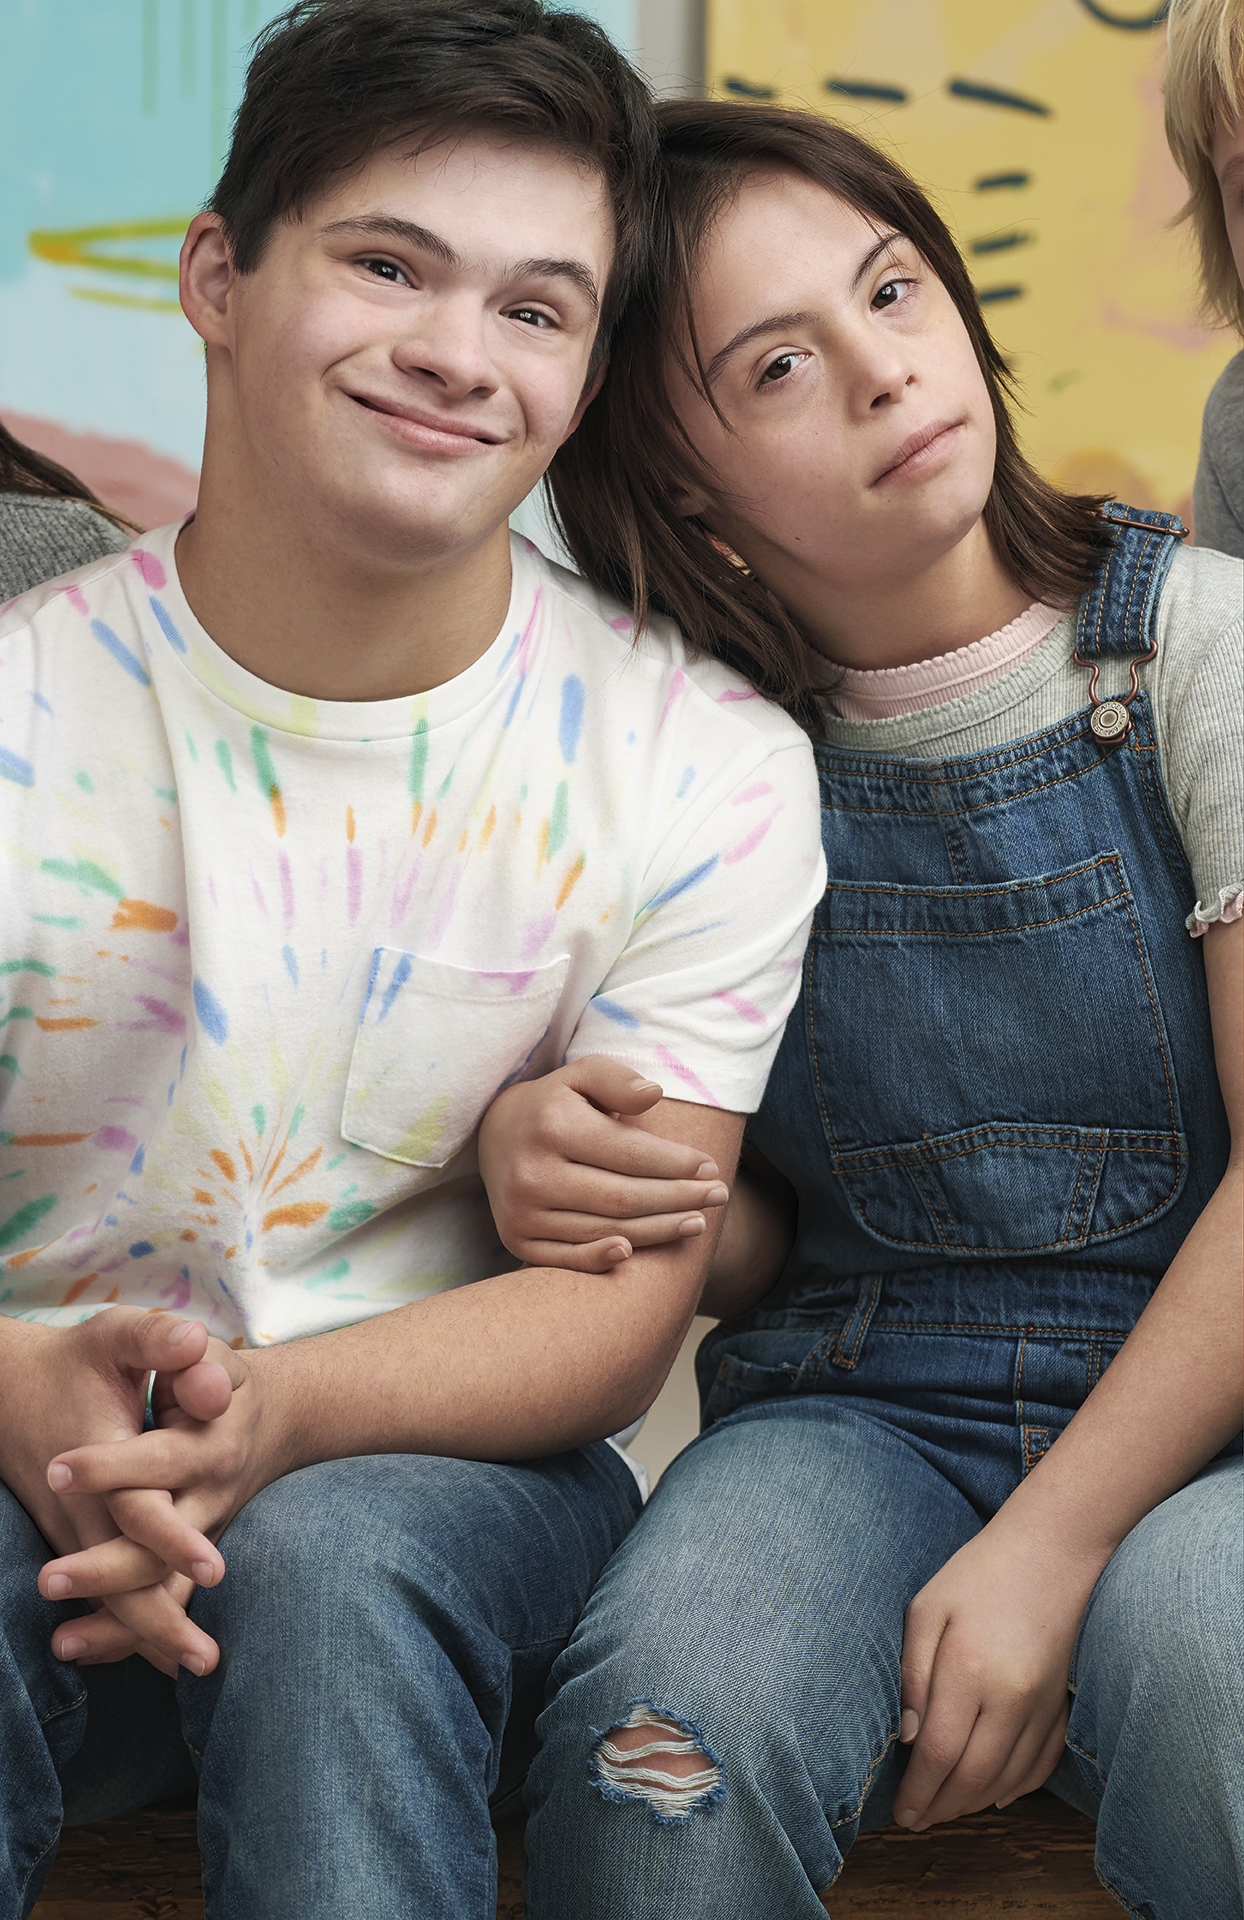 PHOTO: Youth activist Archie Eicher, left, with his sister Sevy Eicher, appear in the Gap's "Generation Good" campaign, featuring inclusive activists and artists.